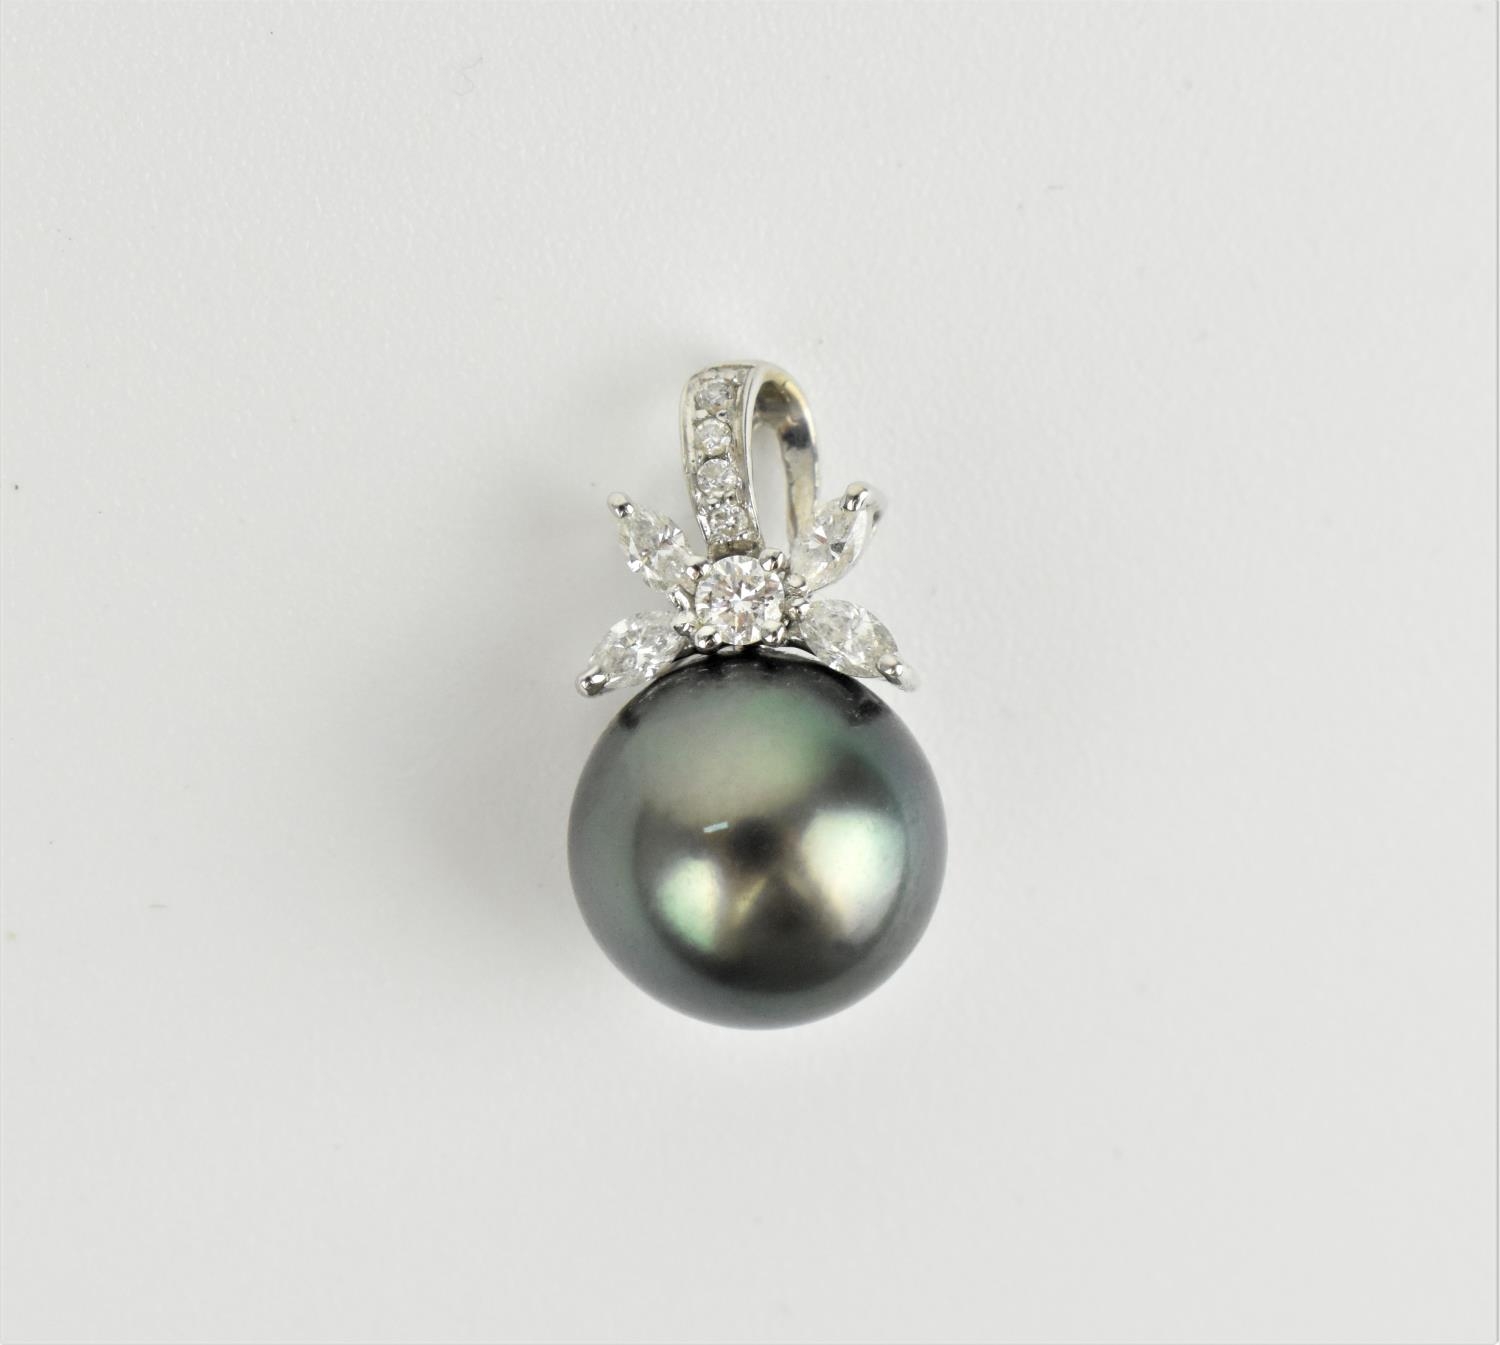 An 18ct white gold, diamond and Tahitian pearl pendant, the pearl surmounted with a diamond floral